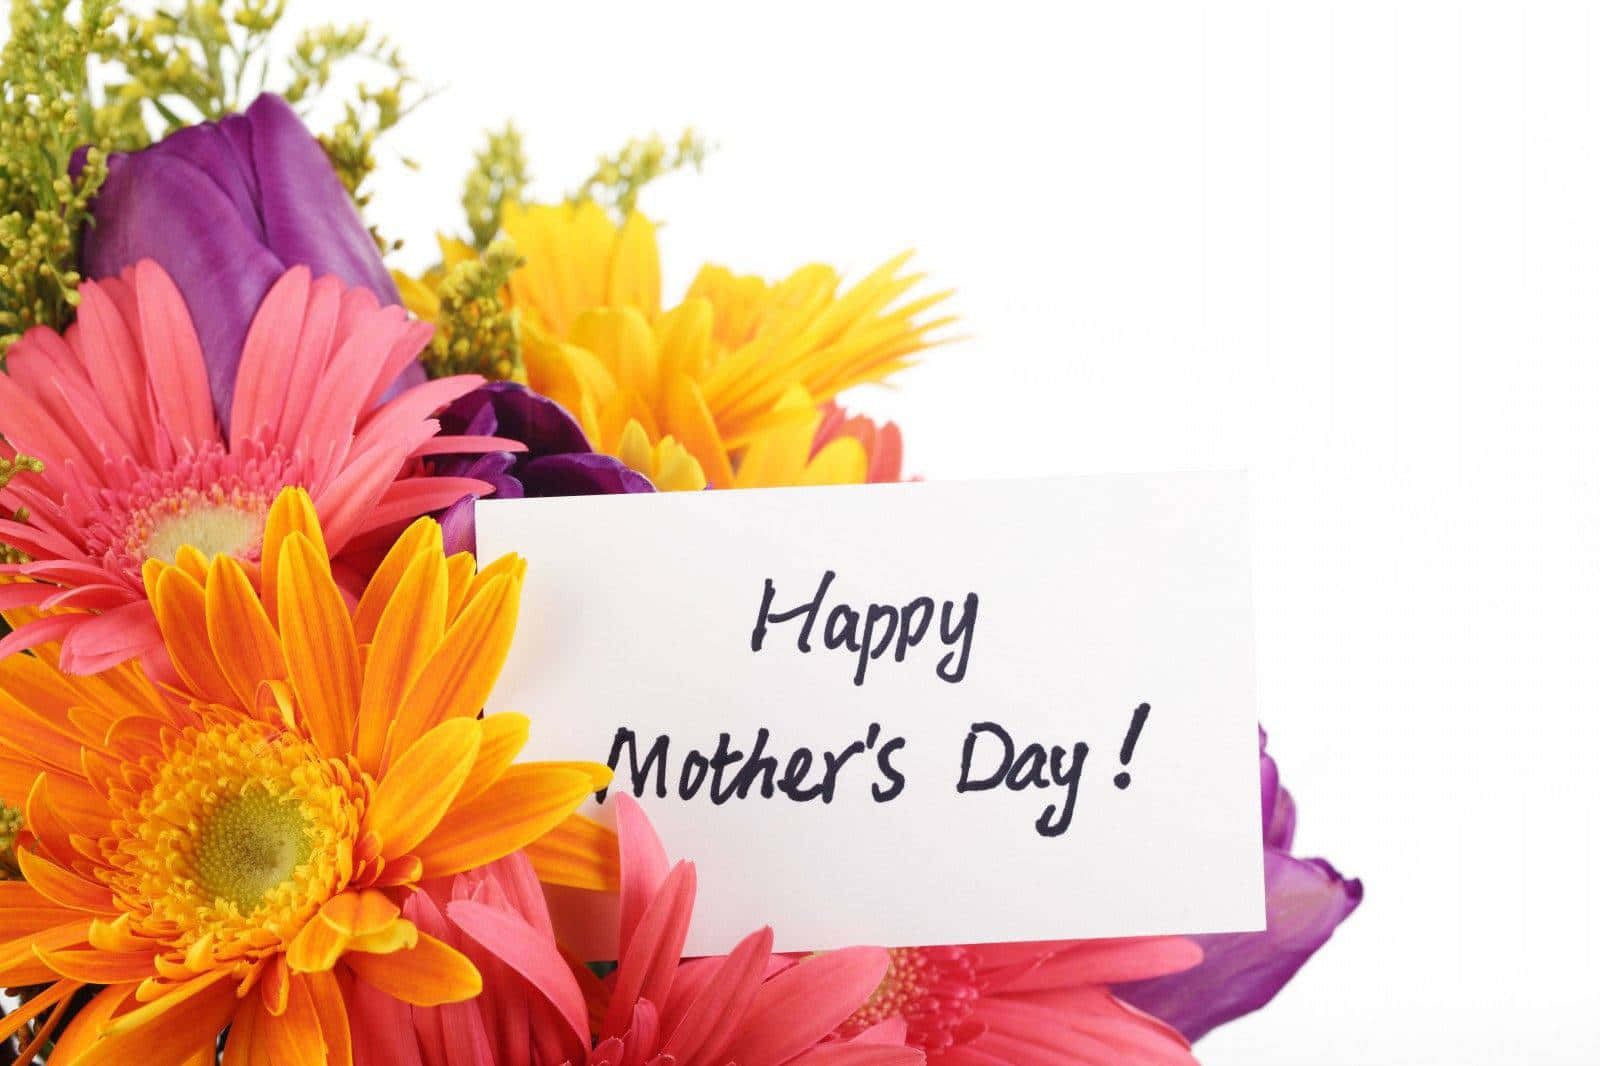 Celebrate the special ladies in your life on Mother's Day